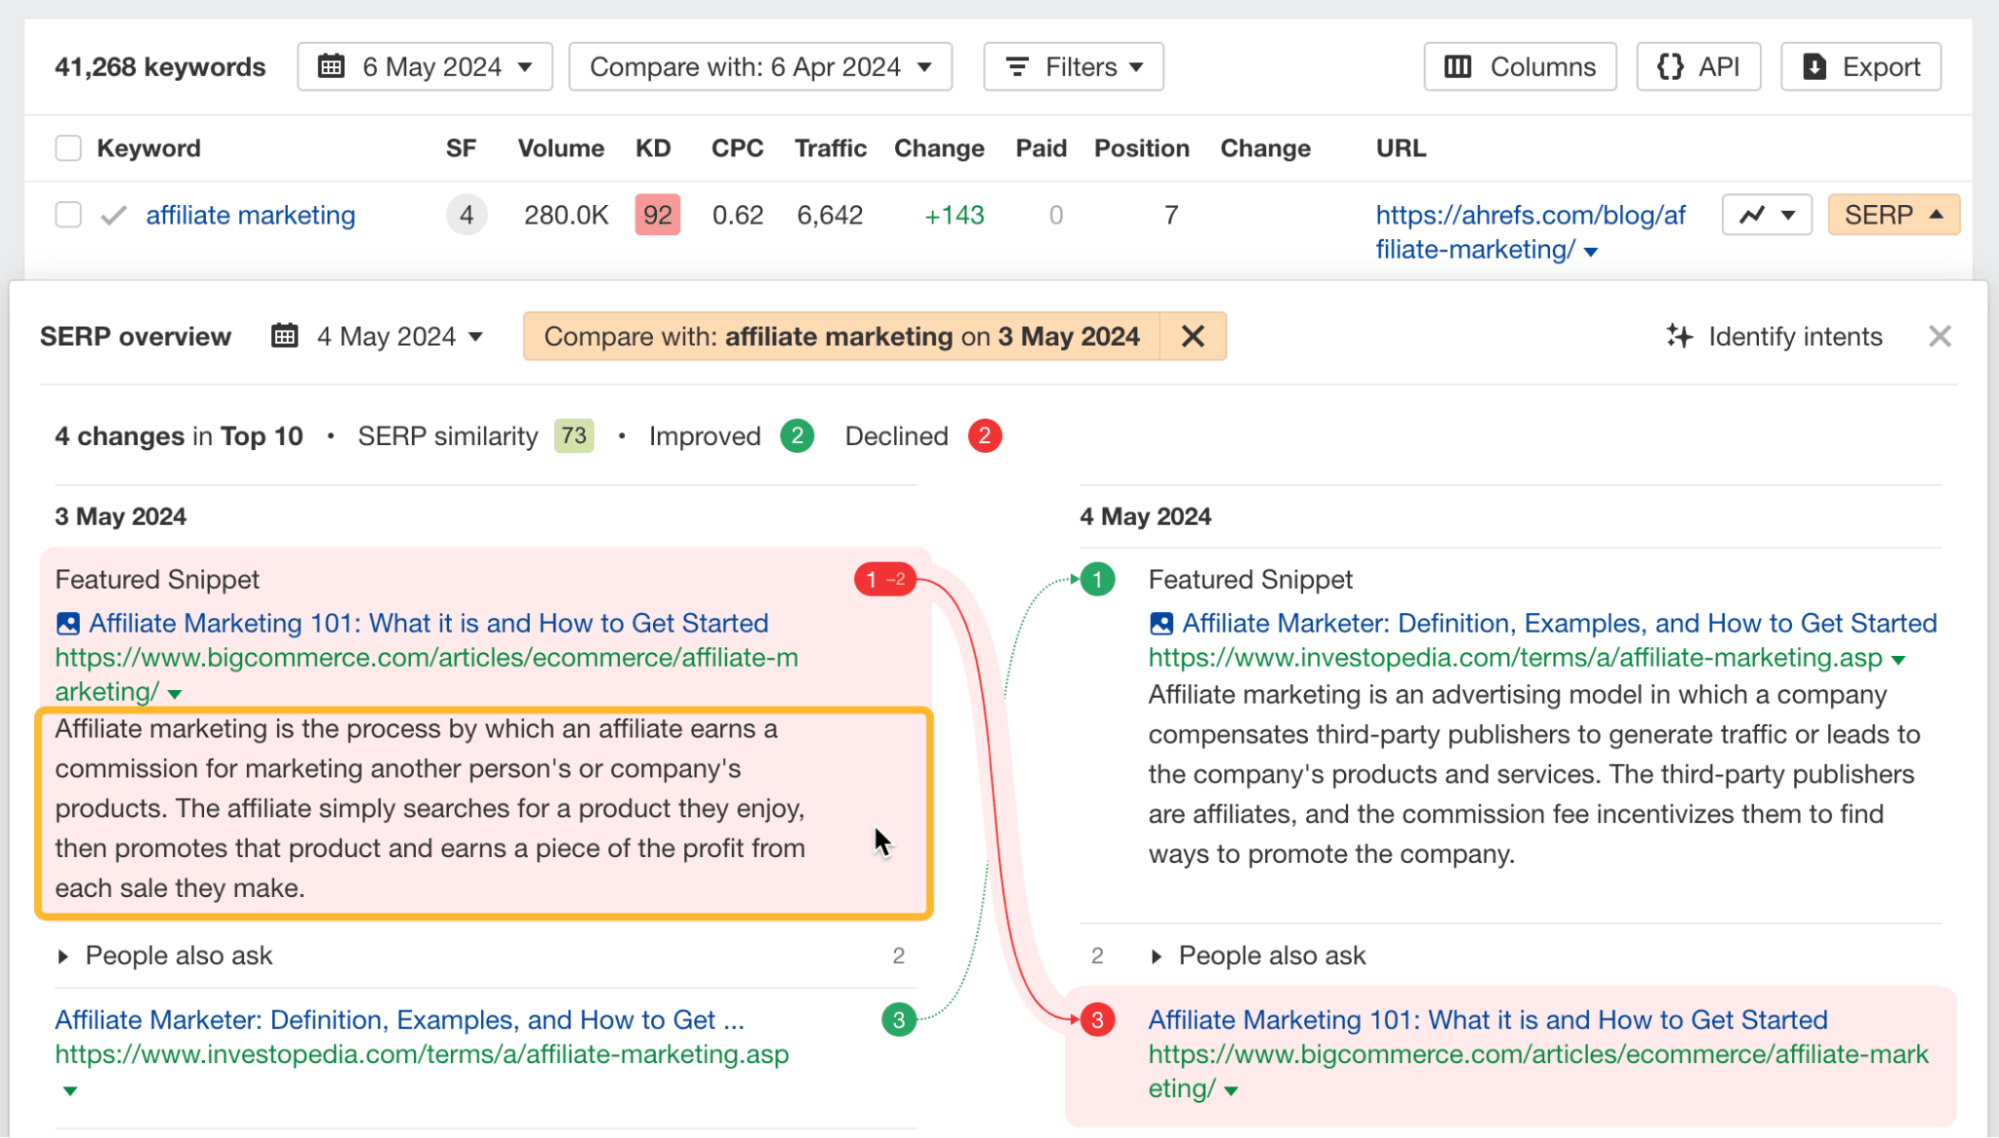 Featured snippet text in SERP overview